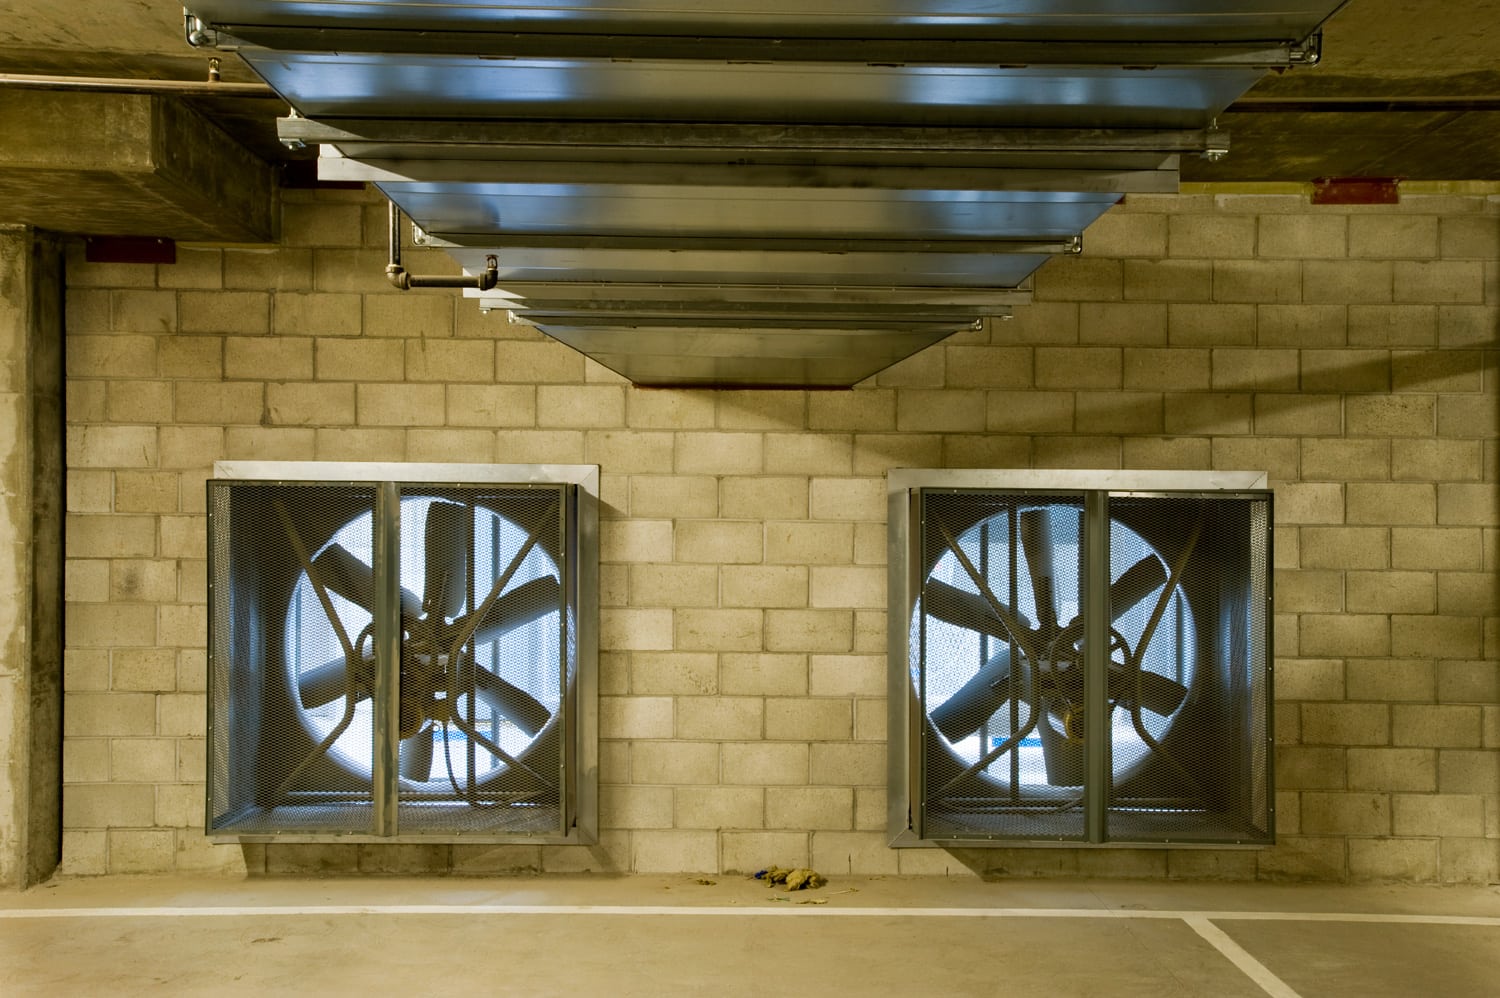 Air Ducts and Ventilation Fans